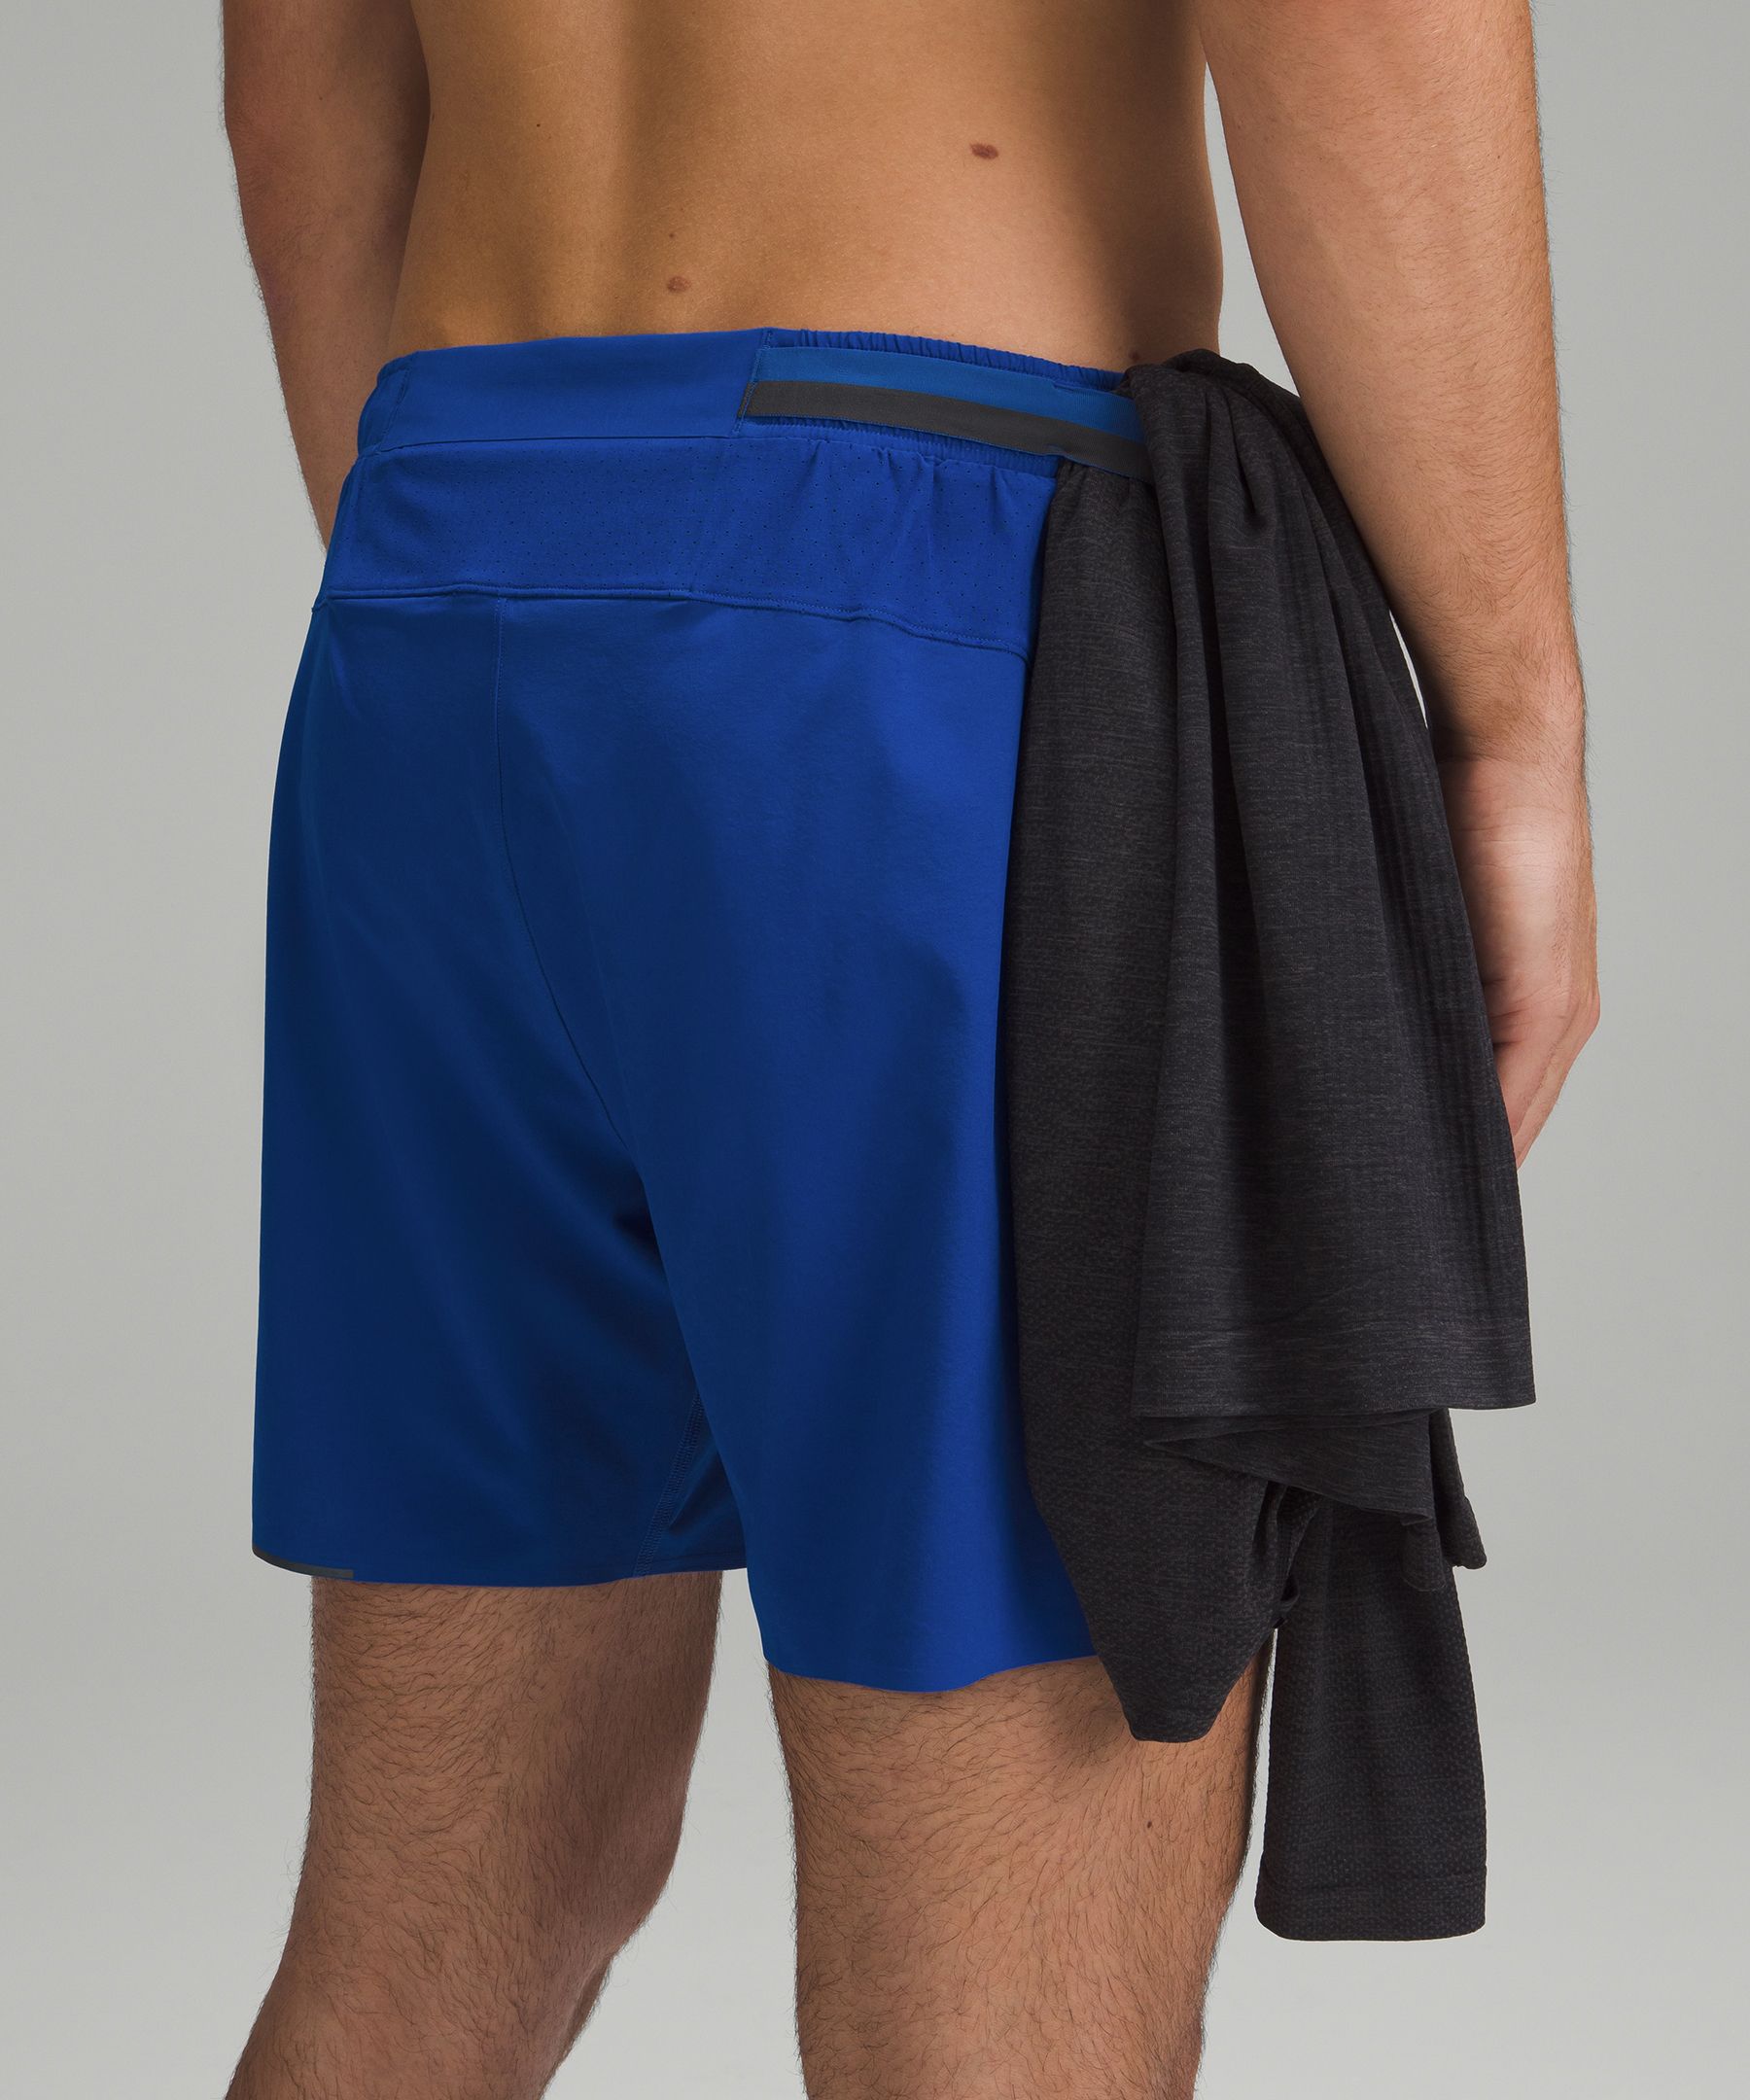 Lululemon Surge Shorts Review, Endorsement, Price, and Where to Buy